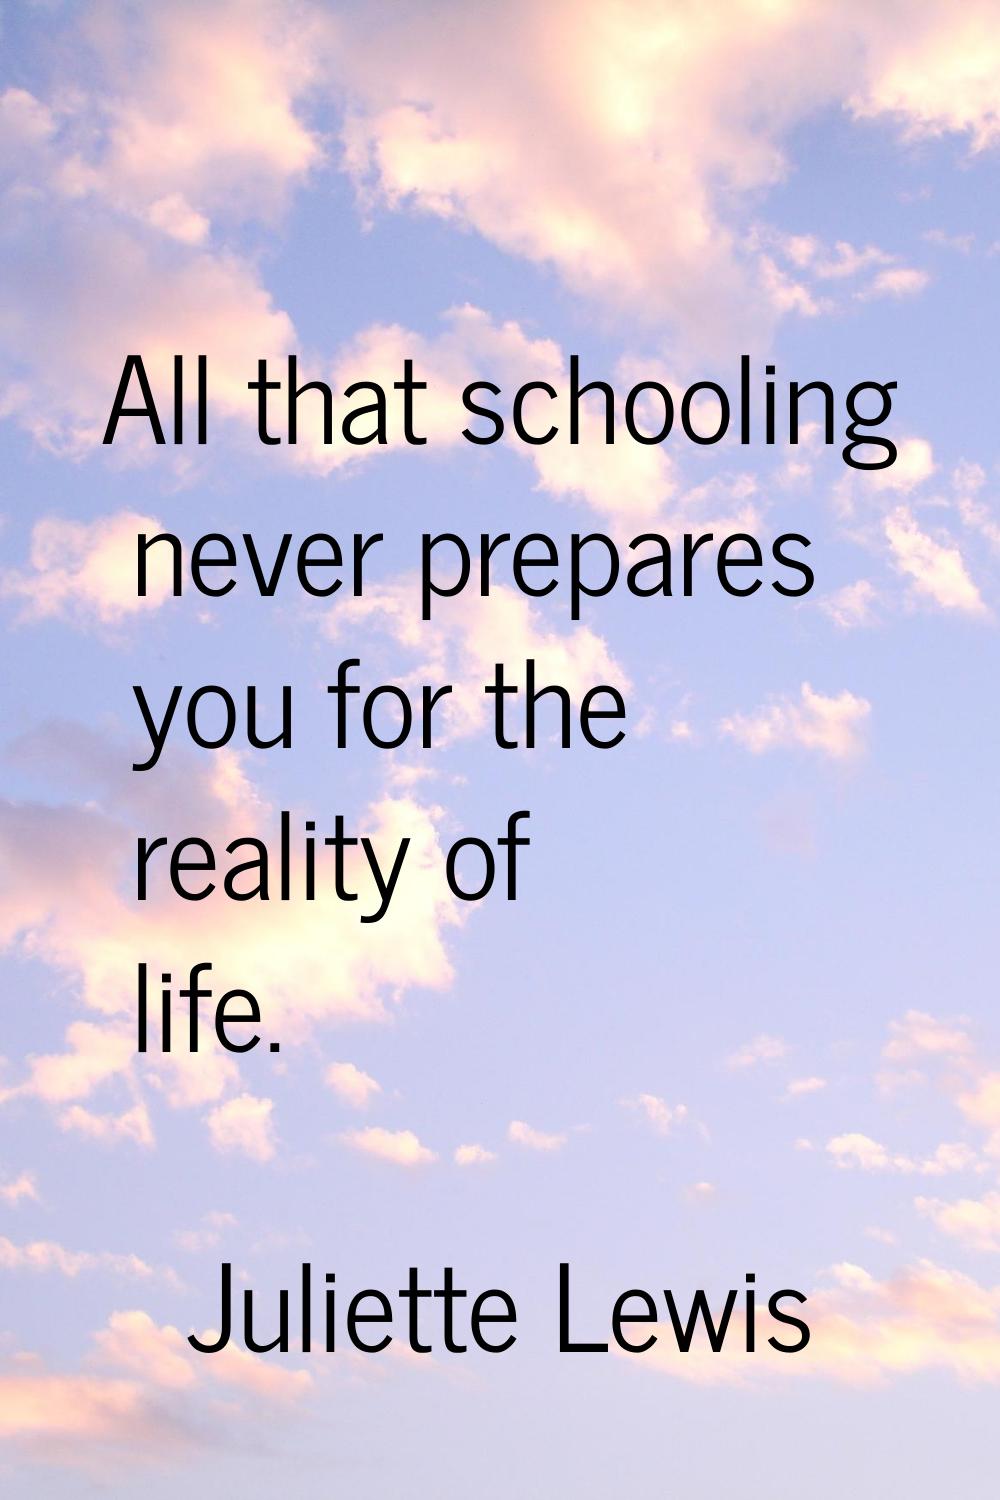 All that schooling never prepares you for the reality of life.